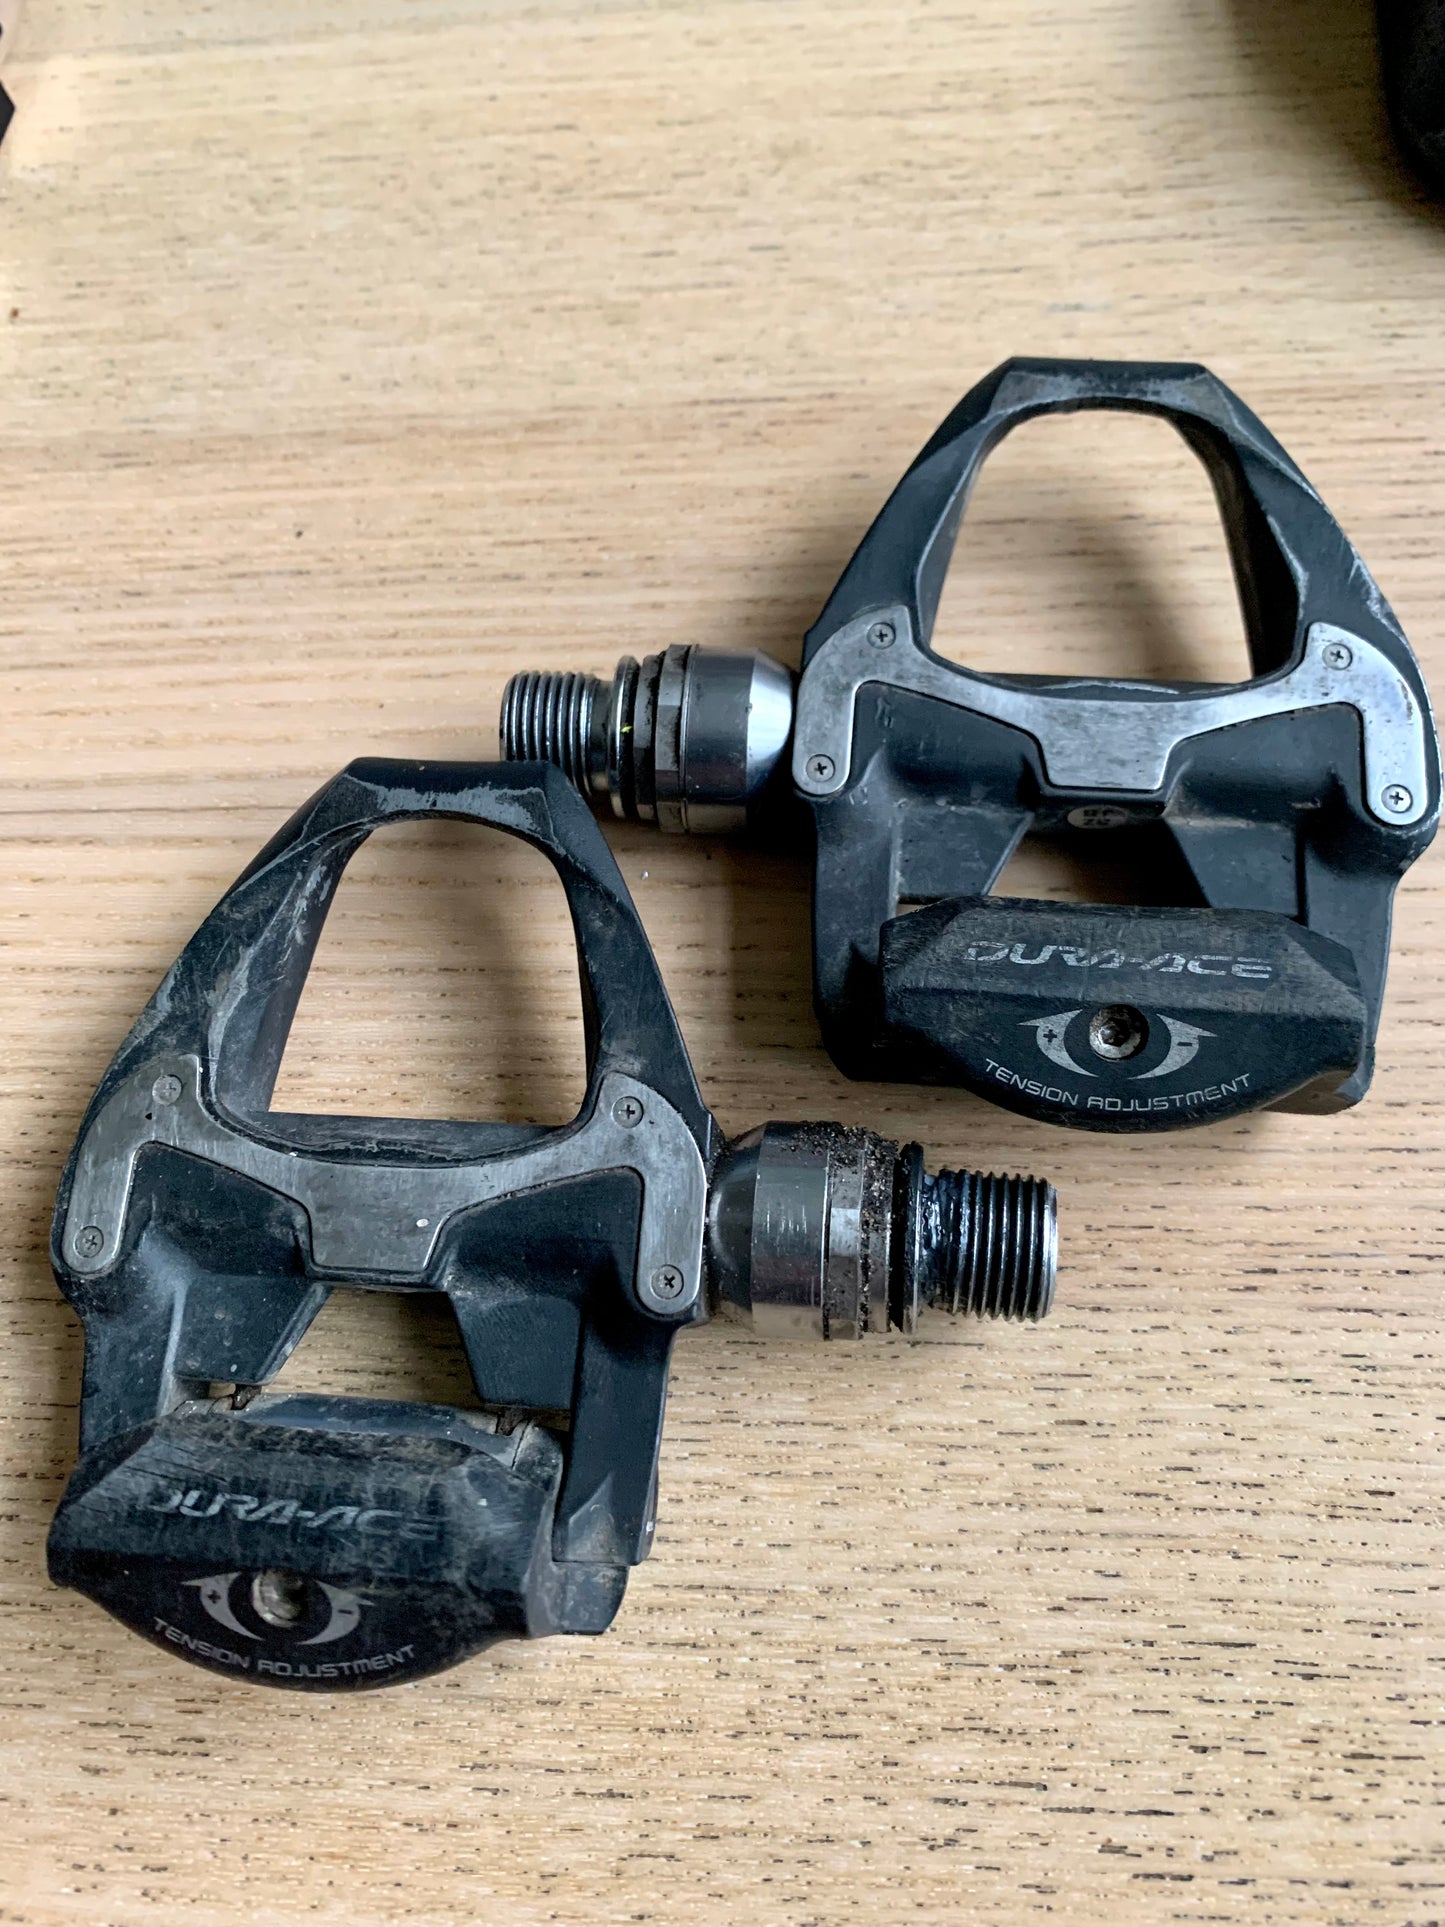 Shimano PD7900 Dura Ace Pedals